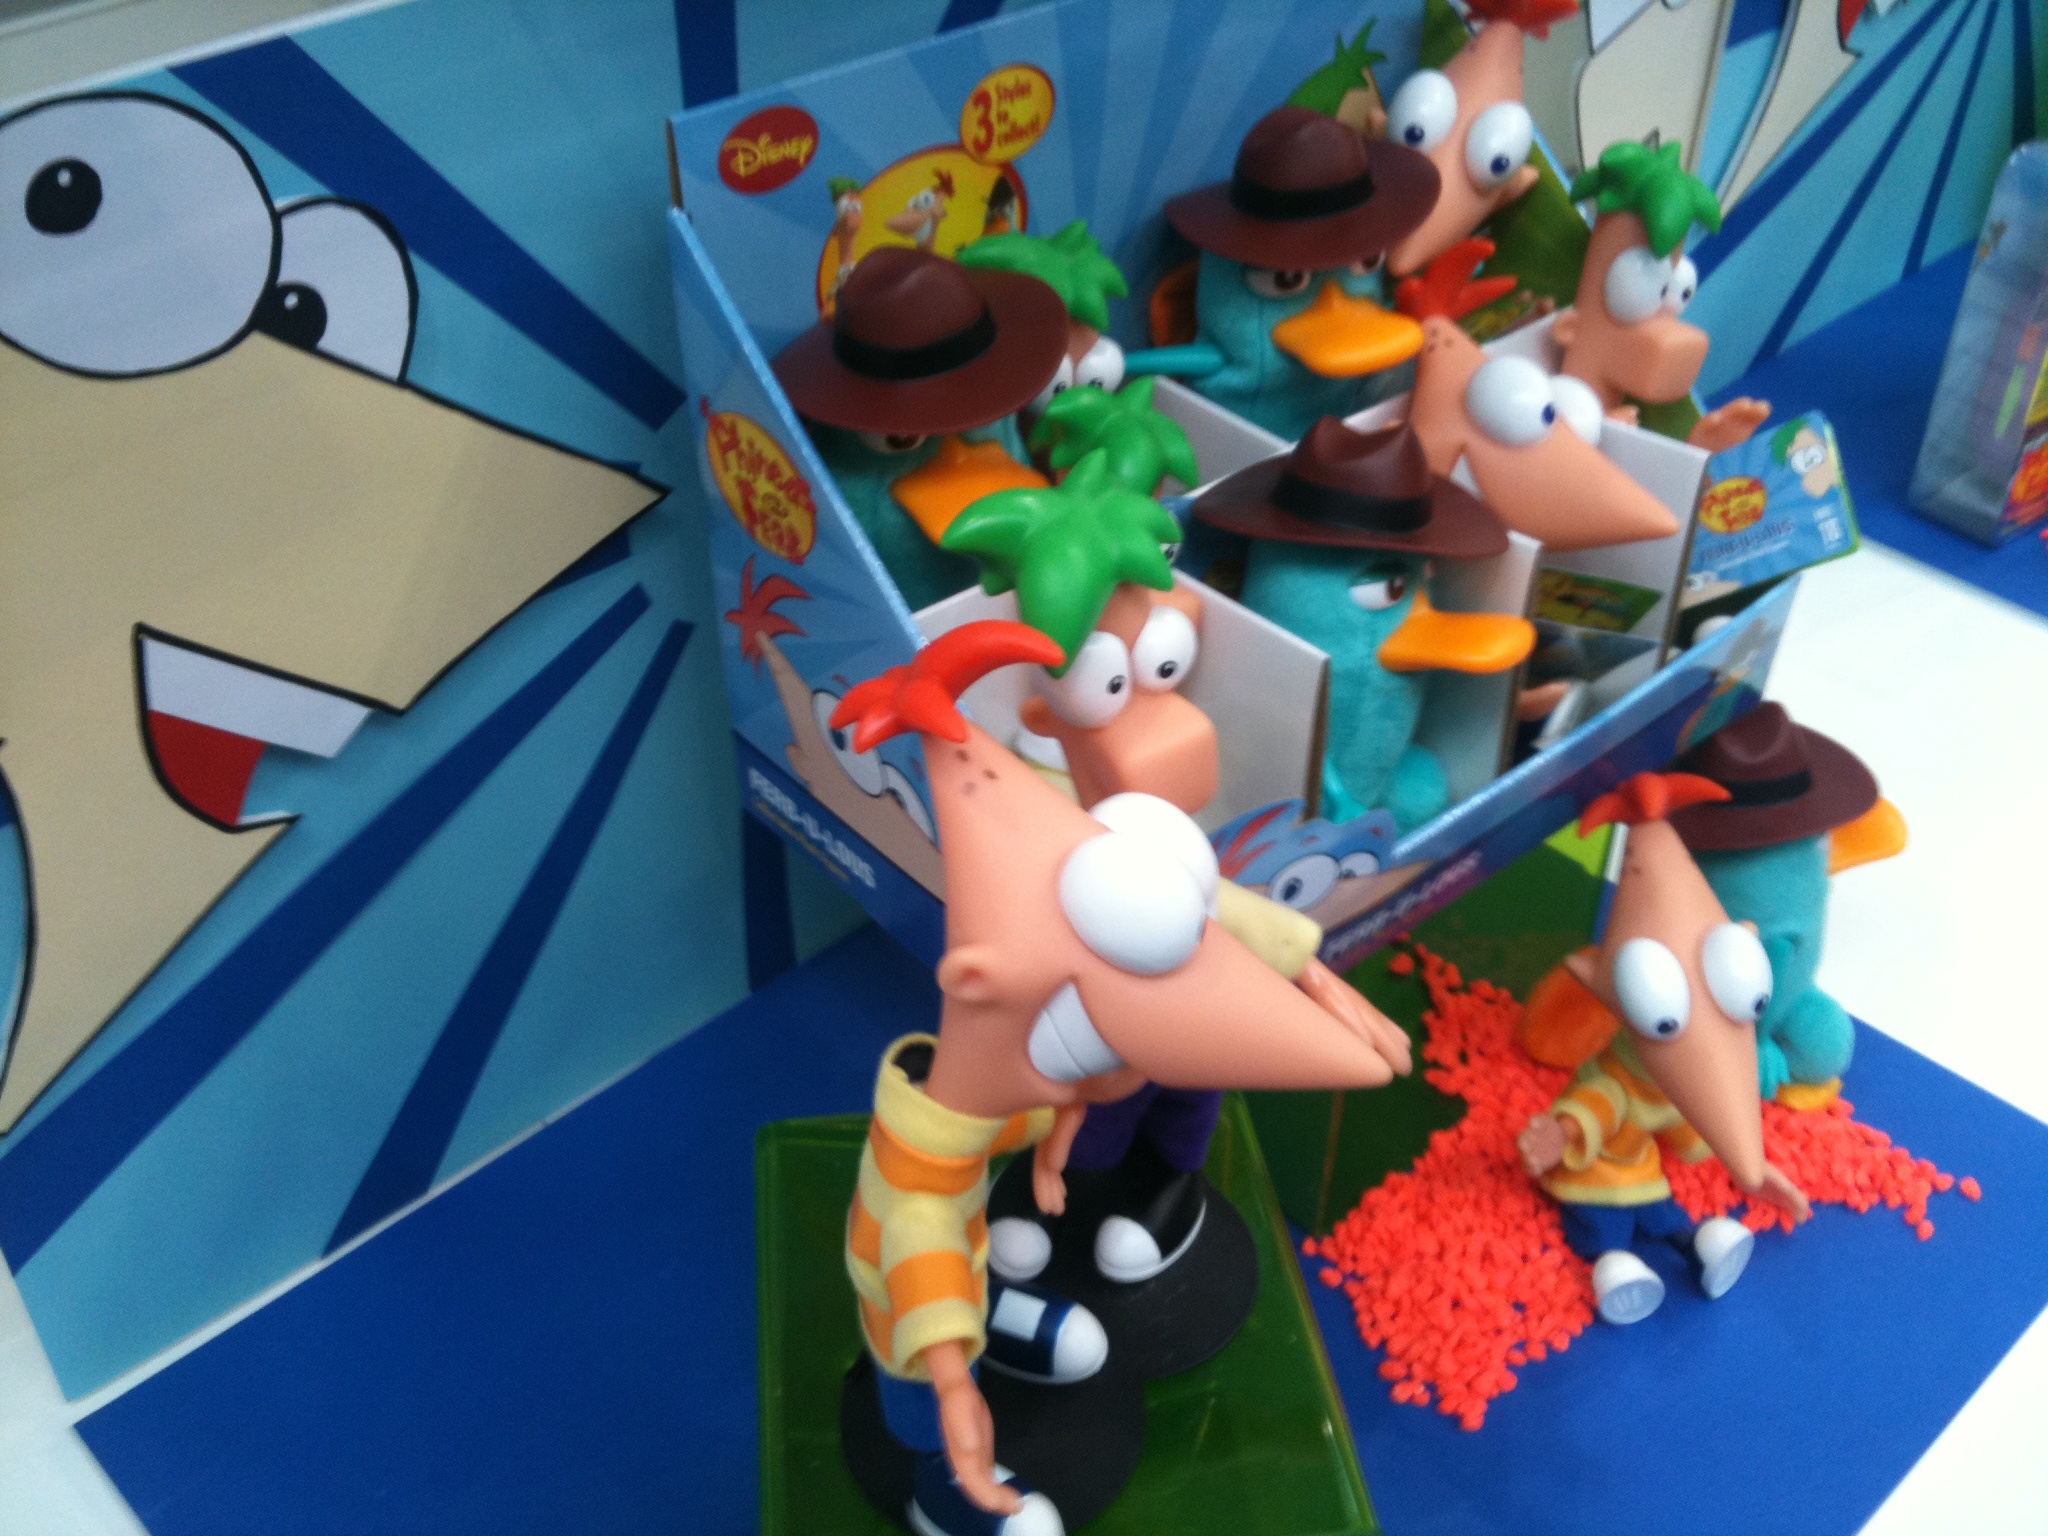 a bunch of cartoon figures on display in a room